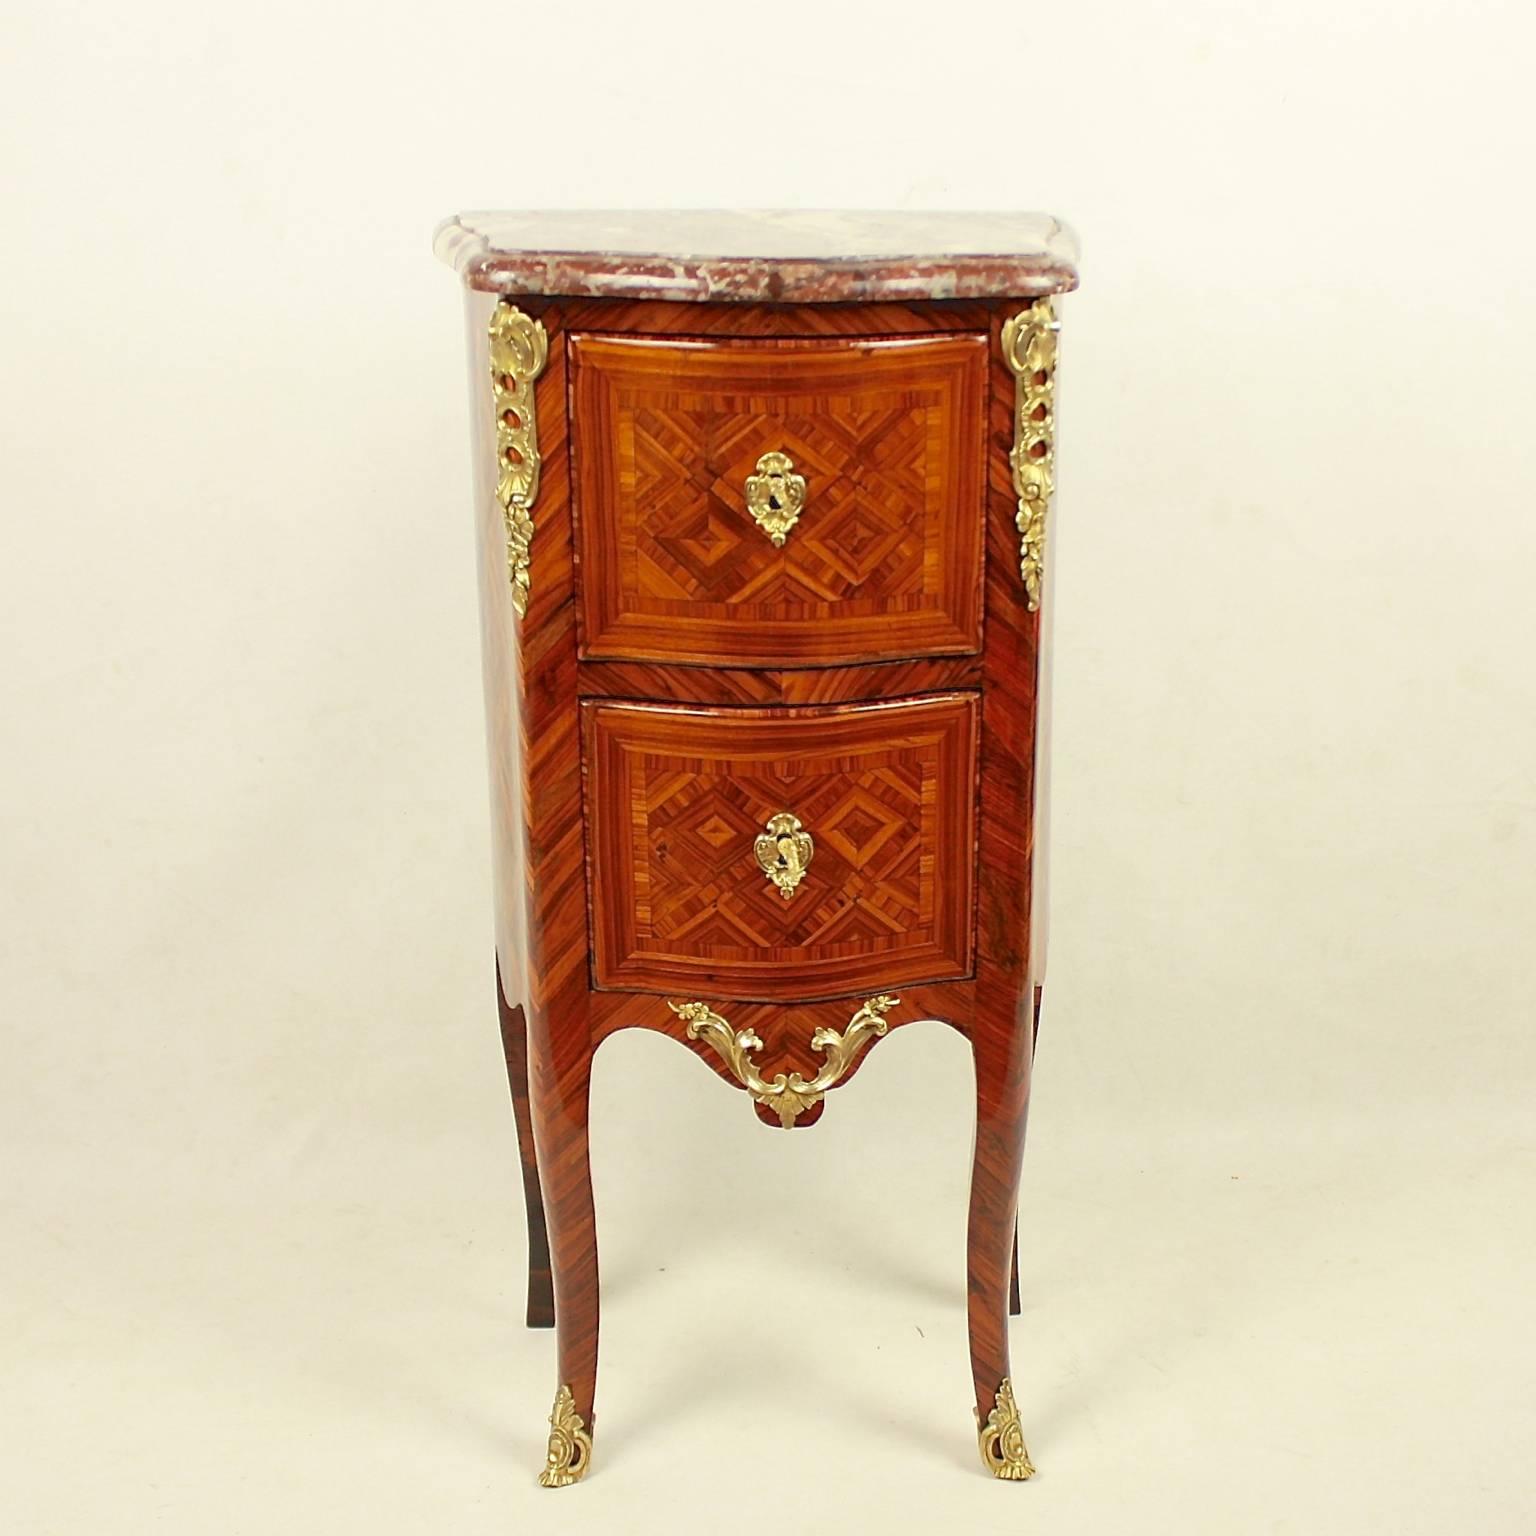 A rare small tulipwood and parquetry commode with gilt bronze mounts in the manner of Mathieu Criaerd (1689-1776).
The commode of serpentine form with a moulded russet marble top above two drawers, with rounded corners, the whole inlaid with cube